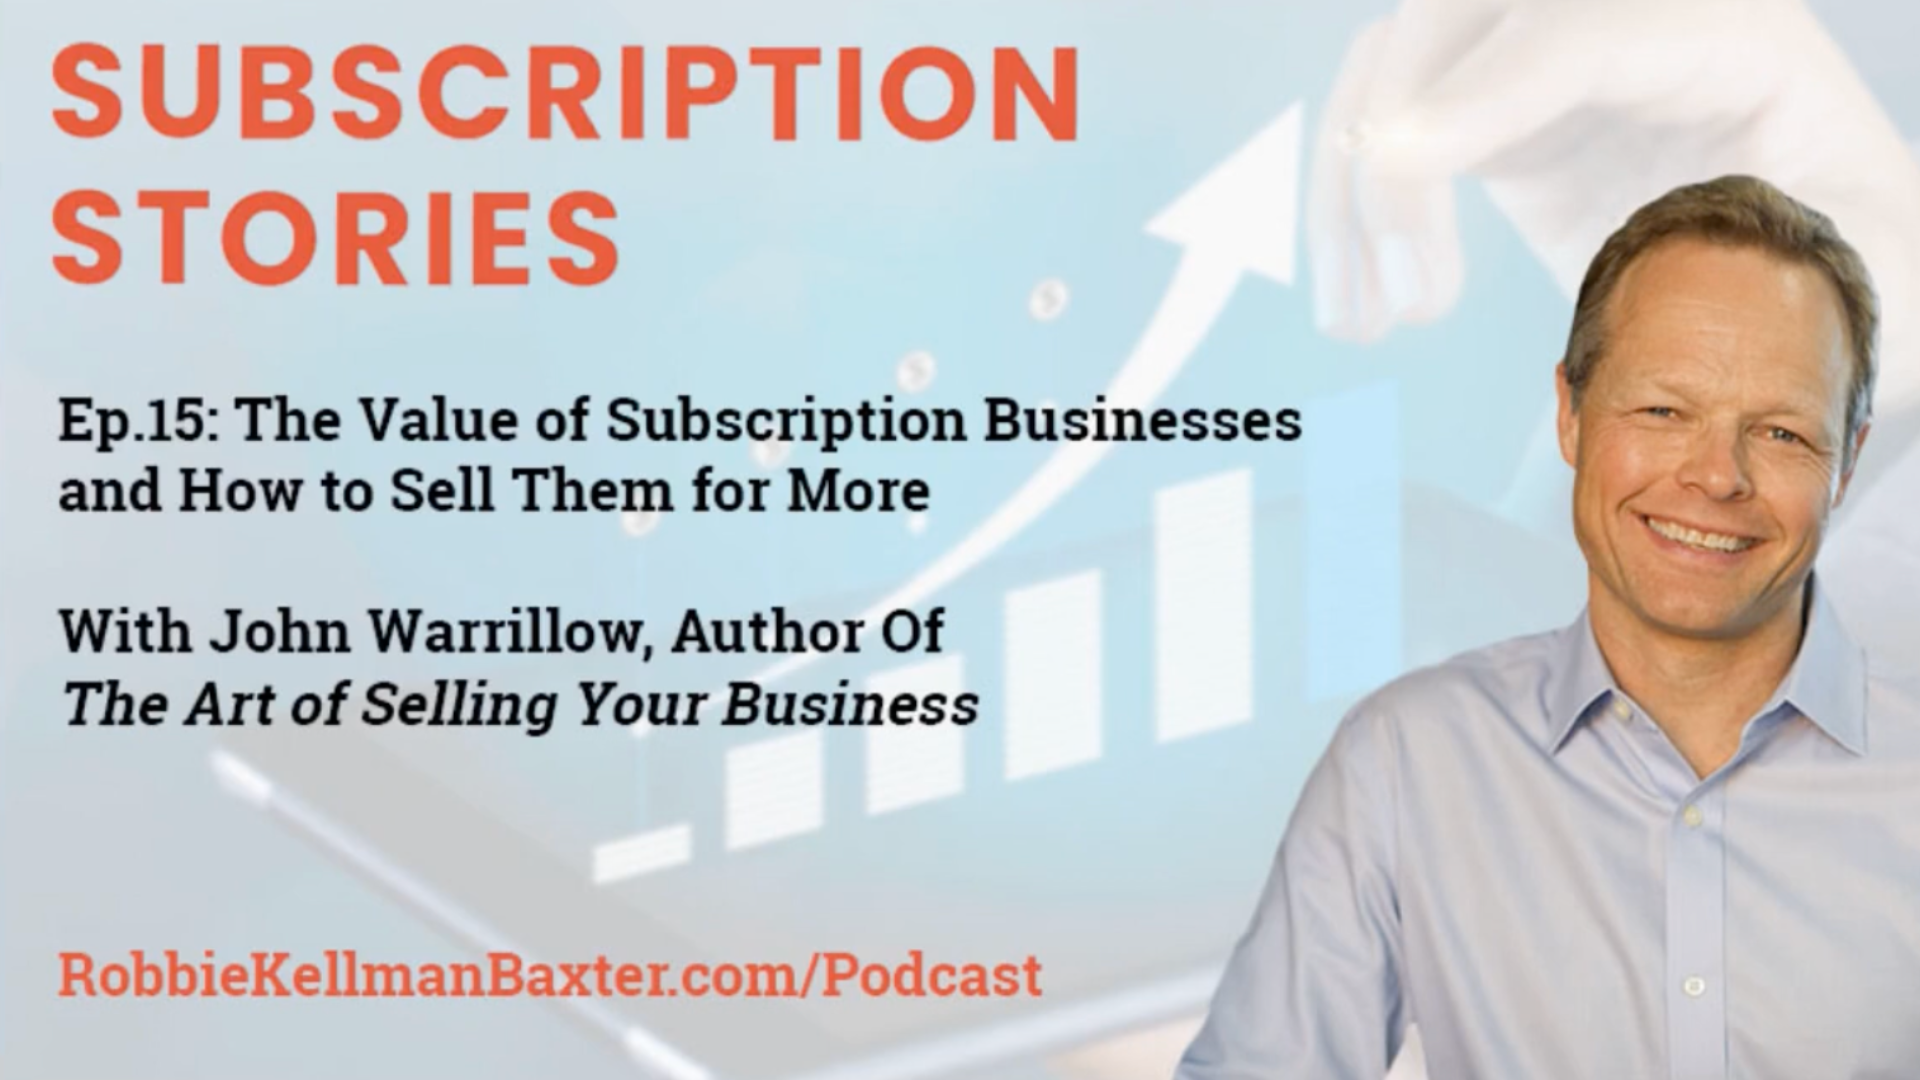 The Value of Subscription Businesses and How to Sell Them for More With John Warrillow, Author of The Art of Selling Your Business